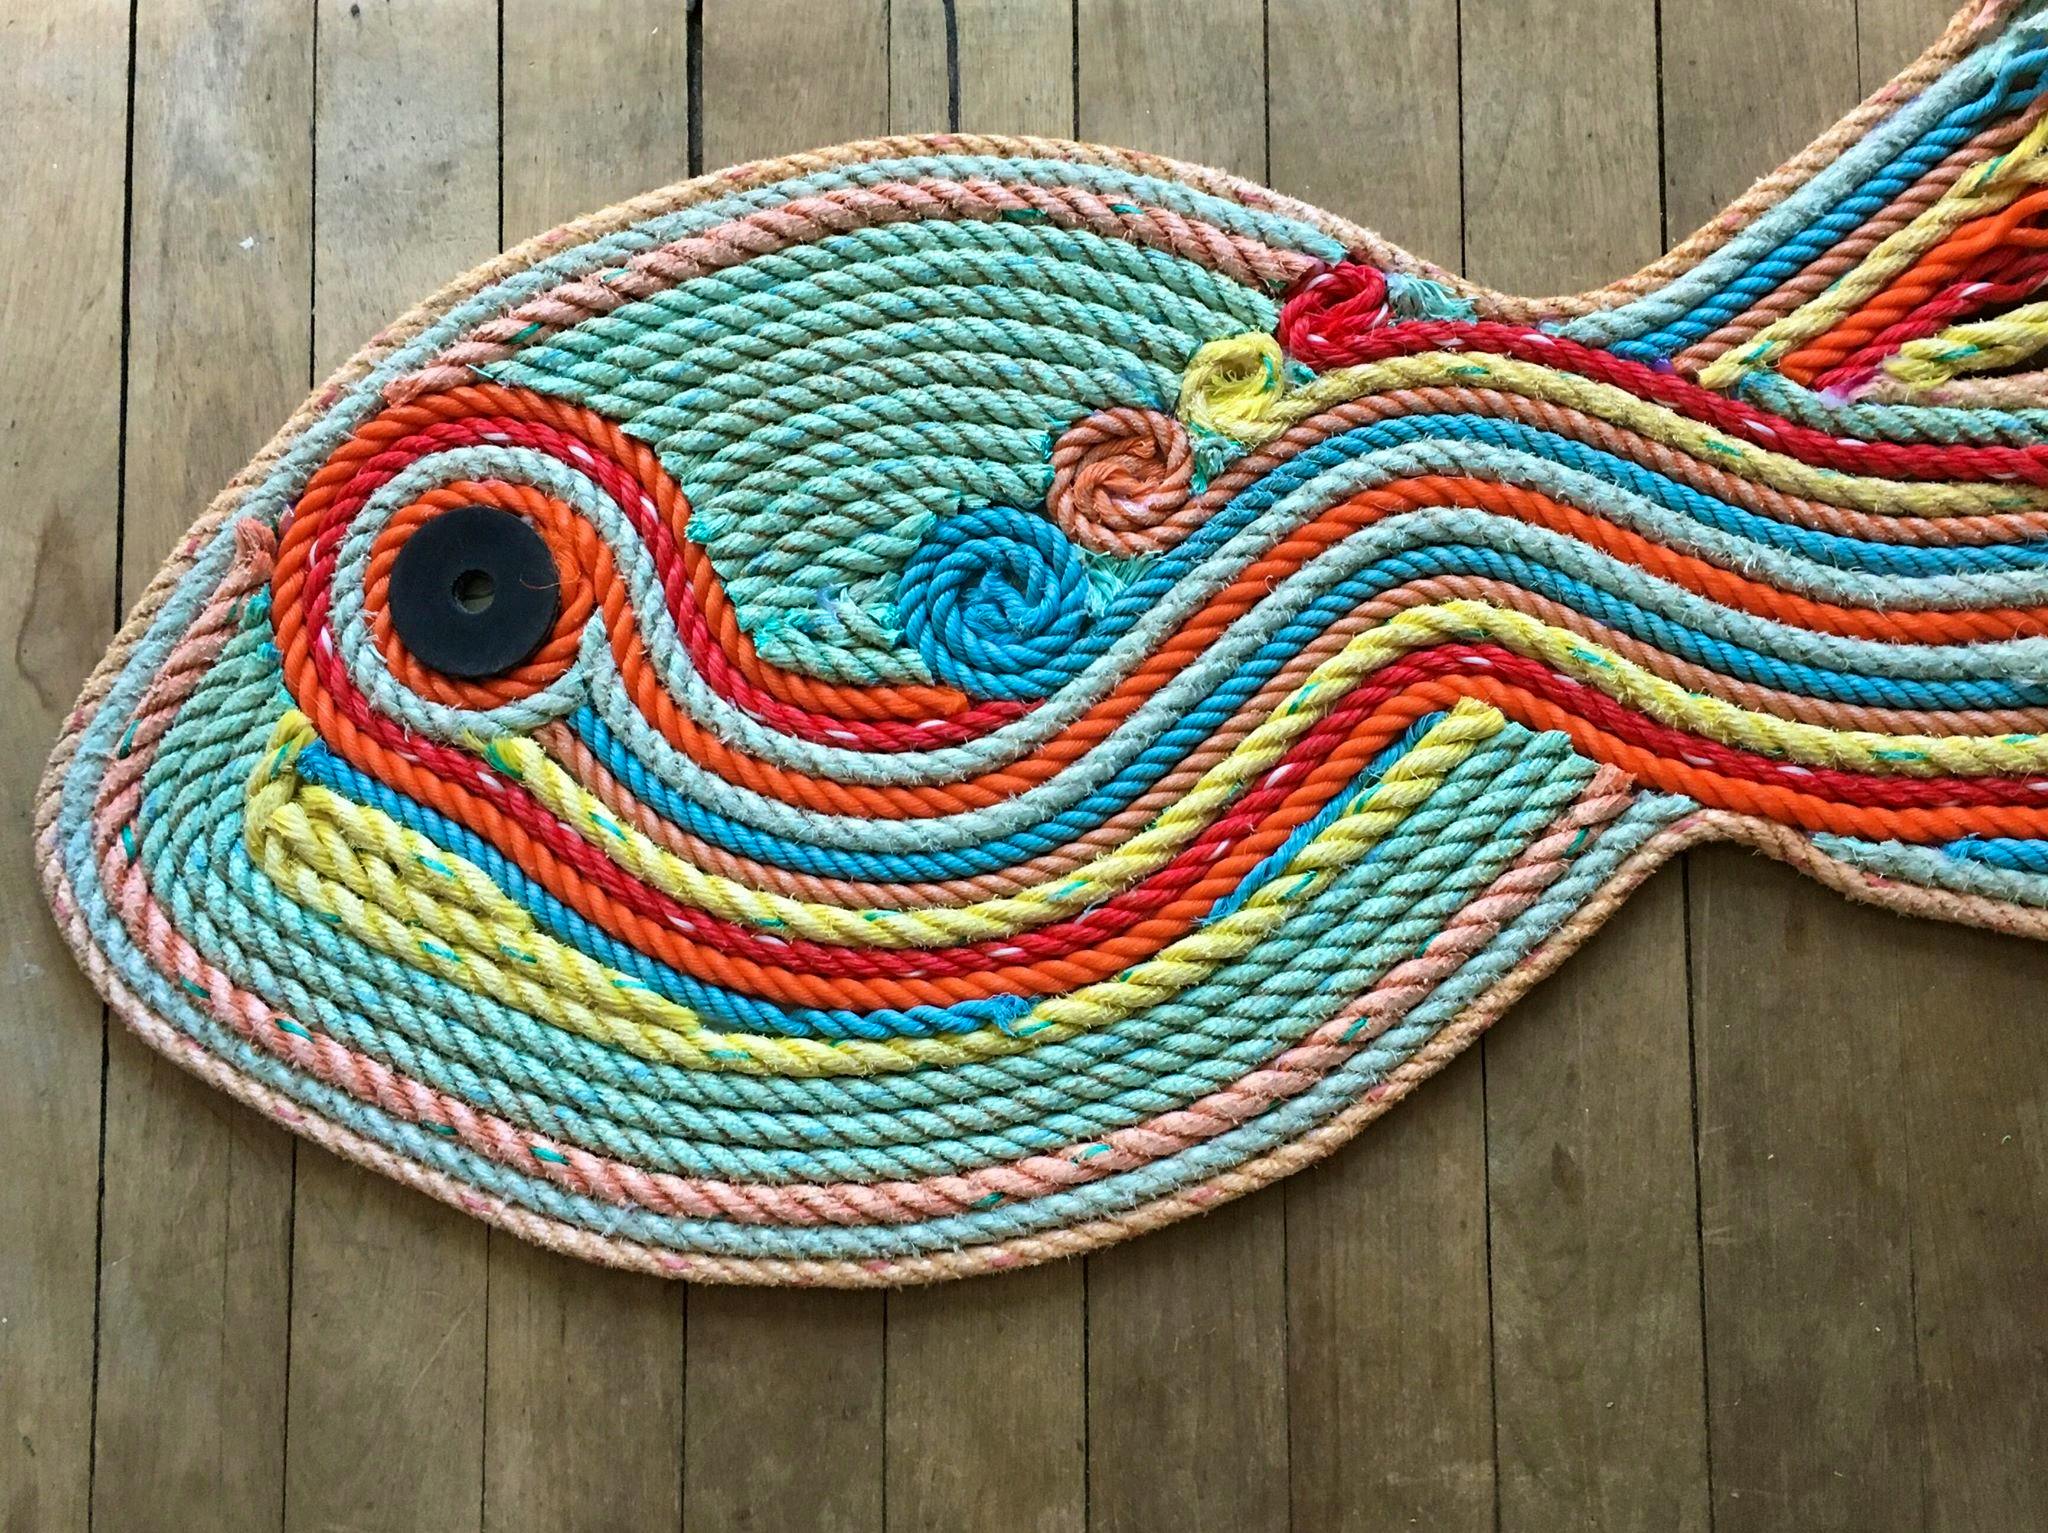 The whales will thank her: Nova Scotia woman's reclaimed rope decor weaves  a creative hobby into help for the environment